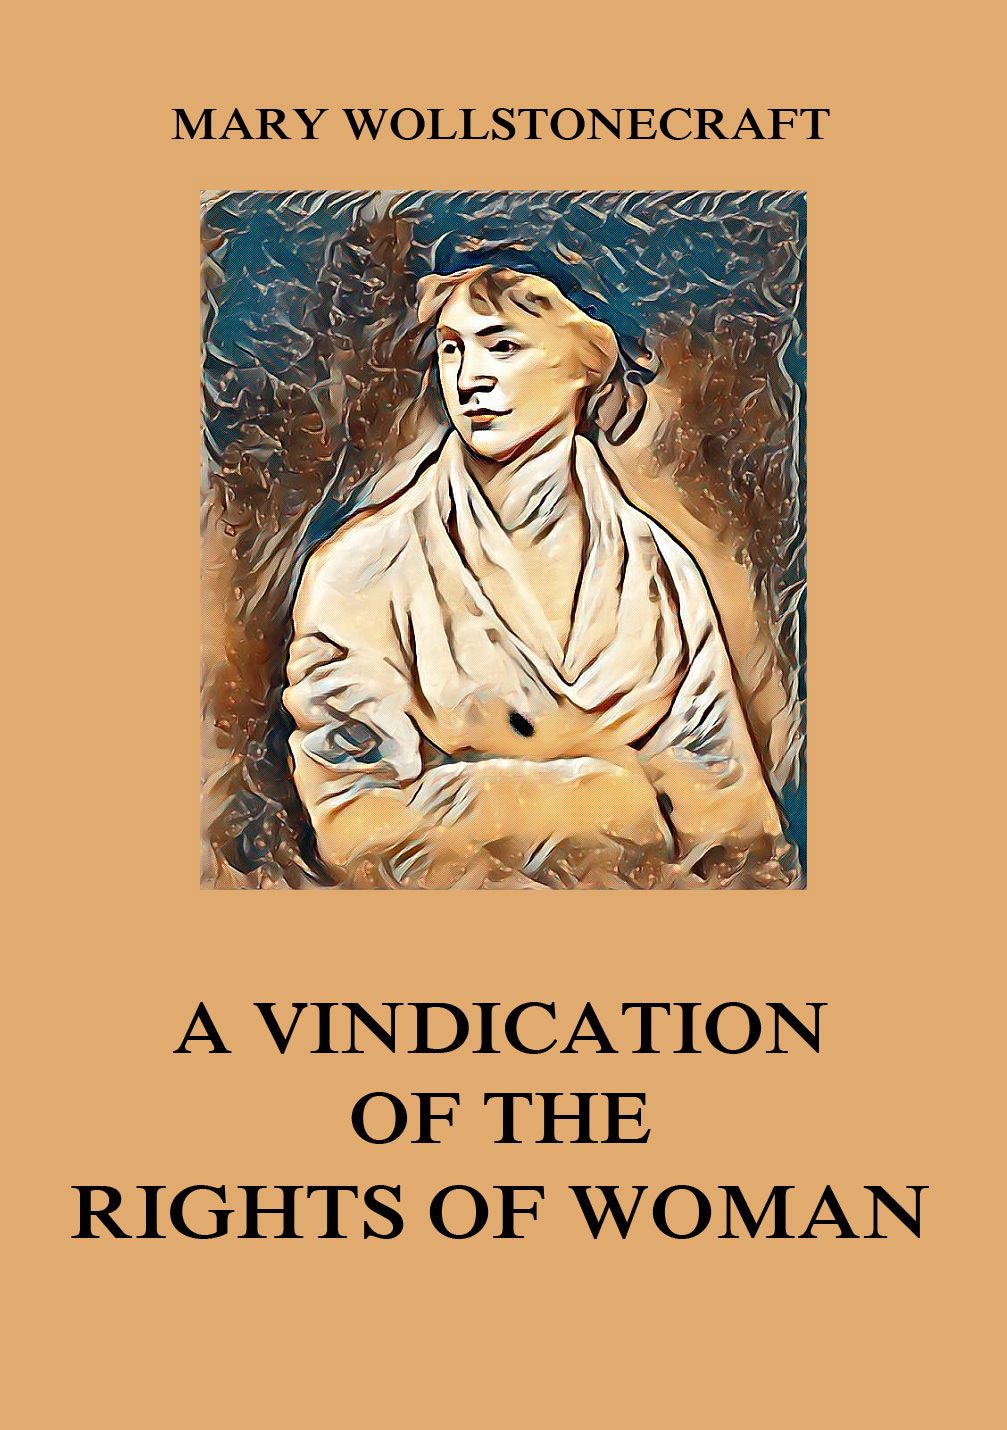 from a vindication of the rights of woman